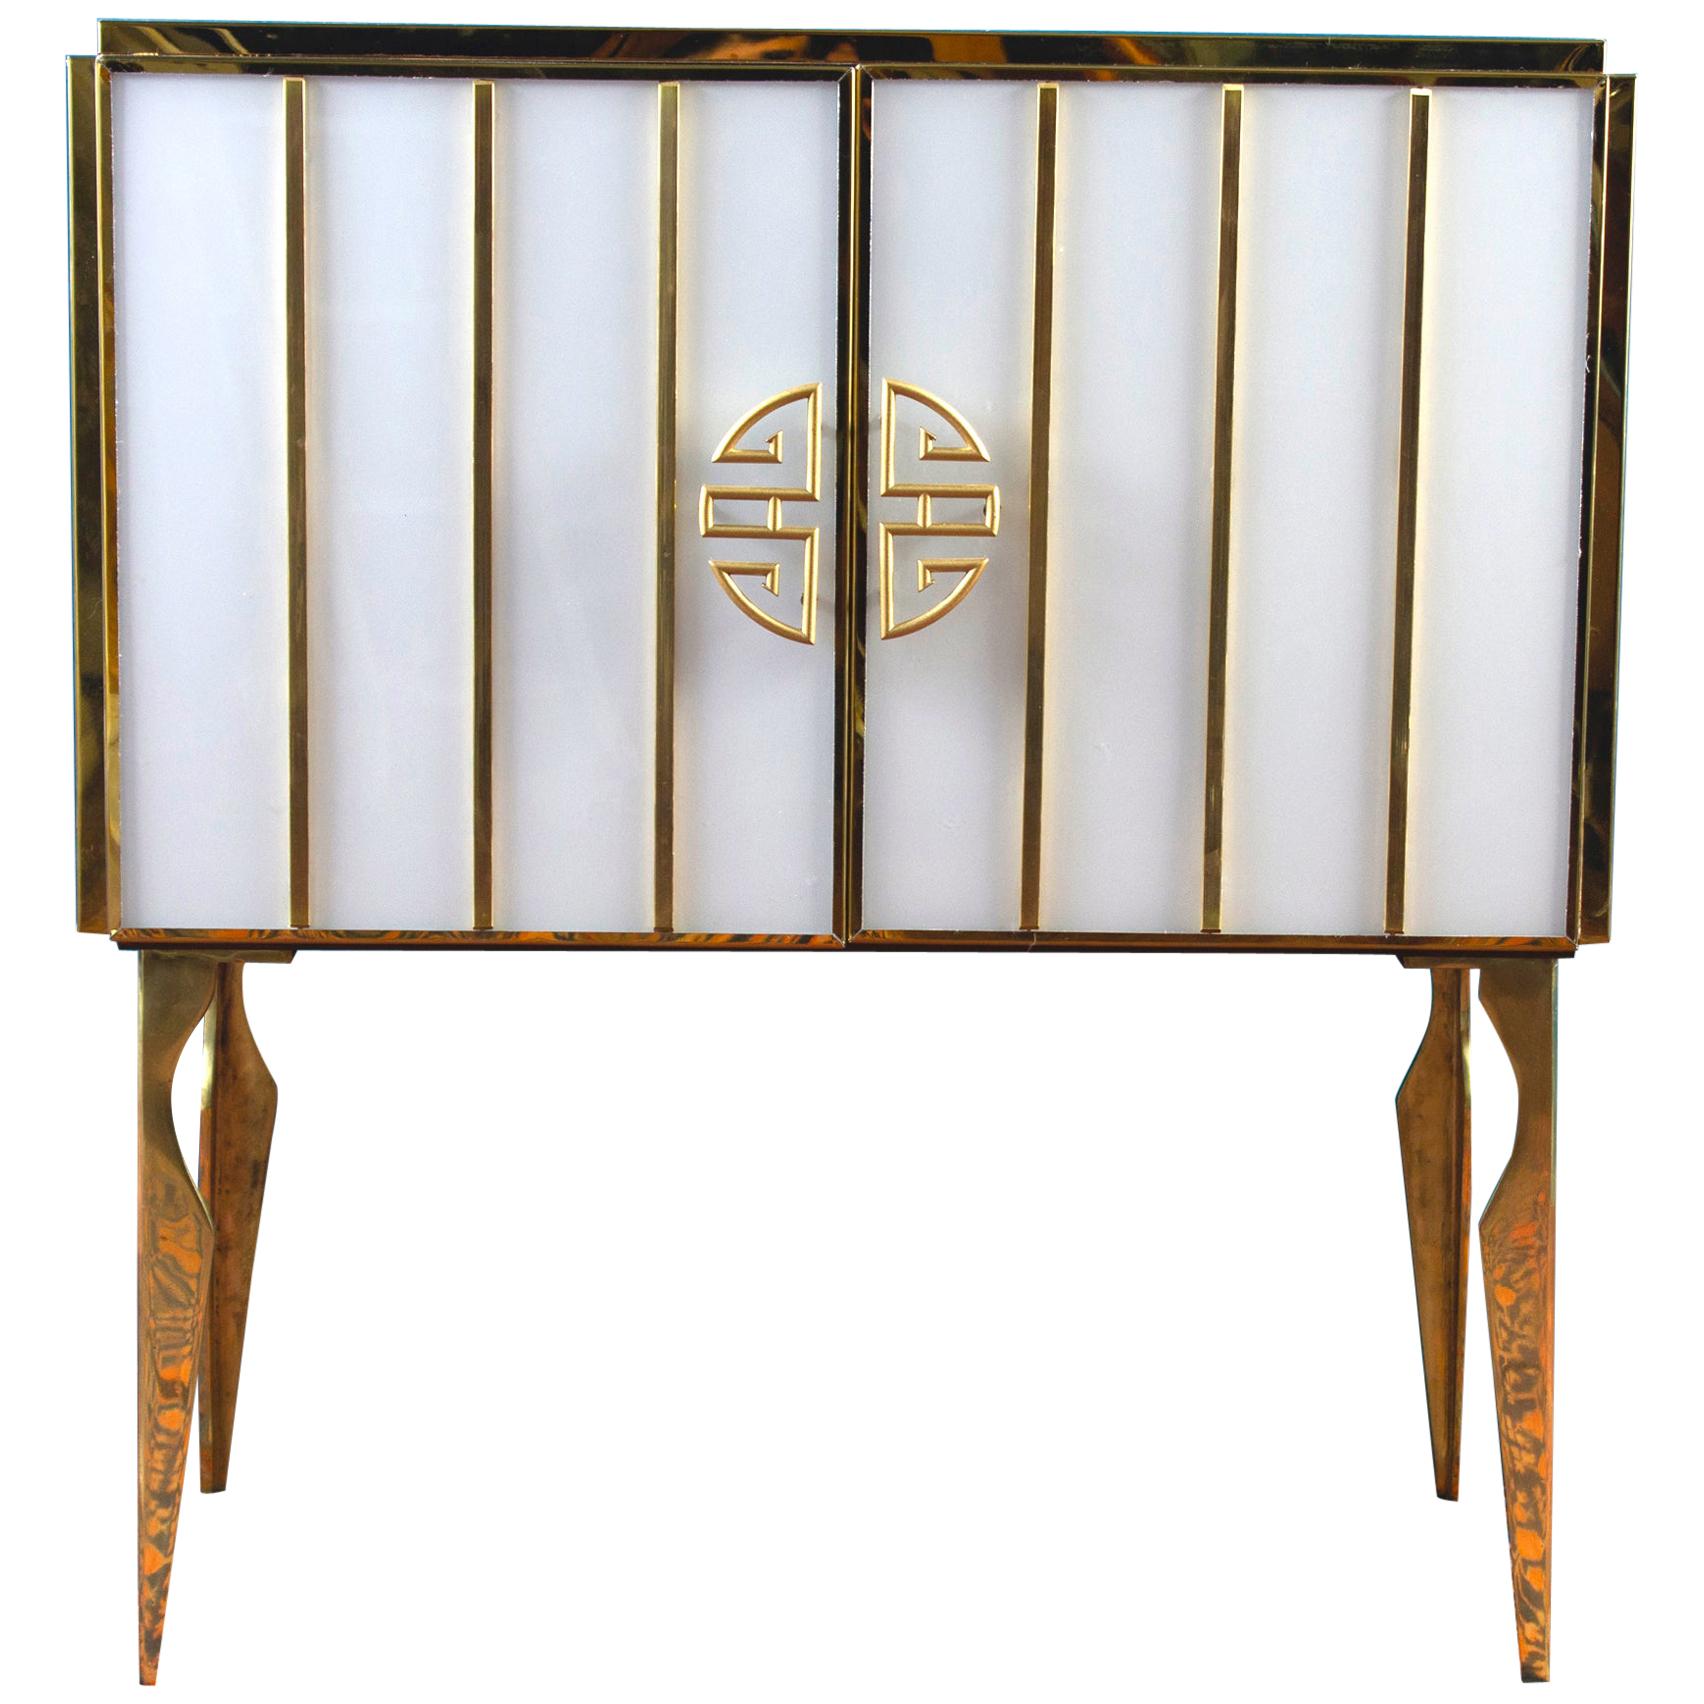 Very fine handmade bar cabinet by a master artisan. Brass frame with handmade and handcut cobalt blue and white opaline Murano glass raised on special brass legs.
Offered separately or as a pair. Listed price is for one item.